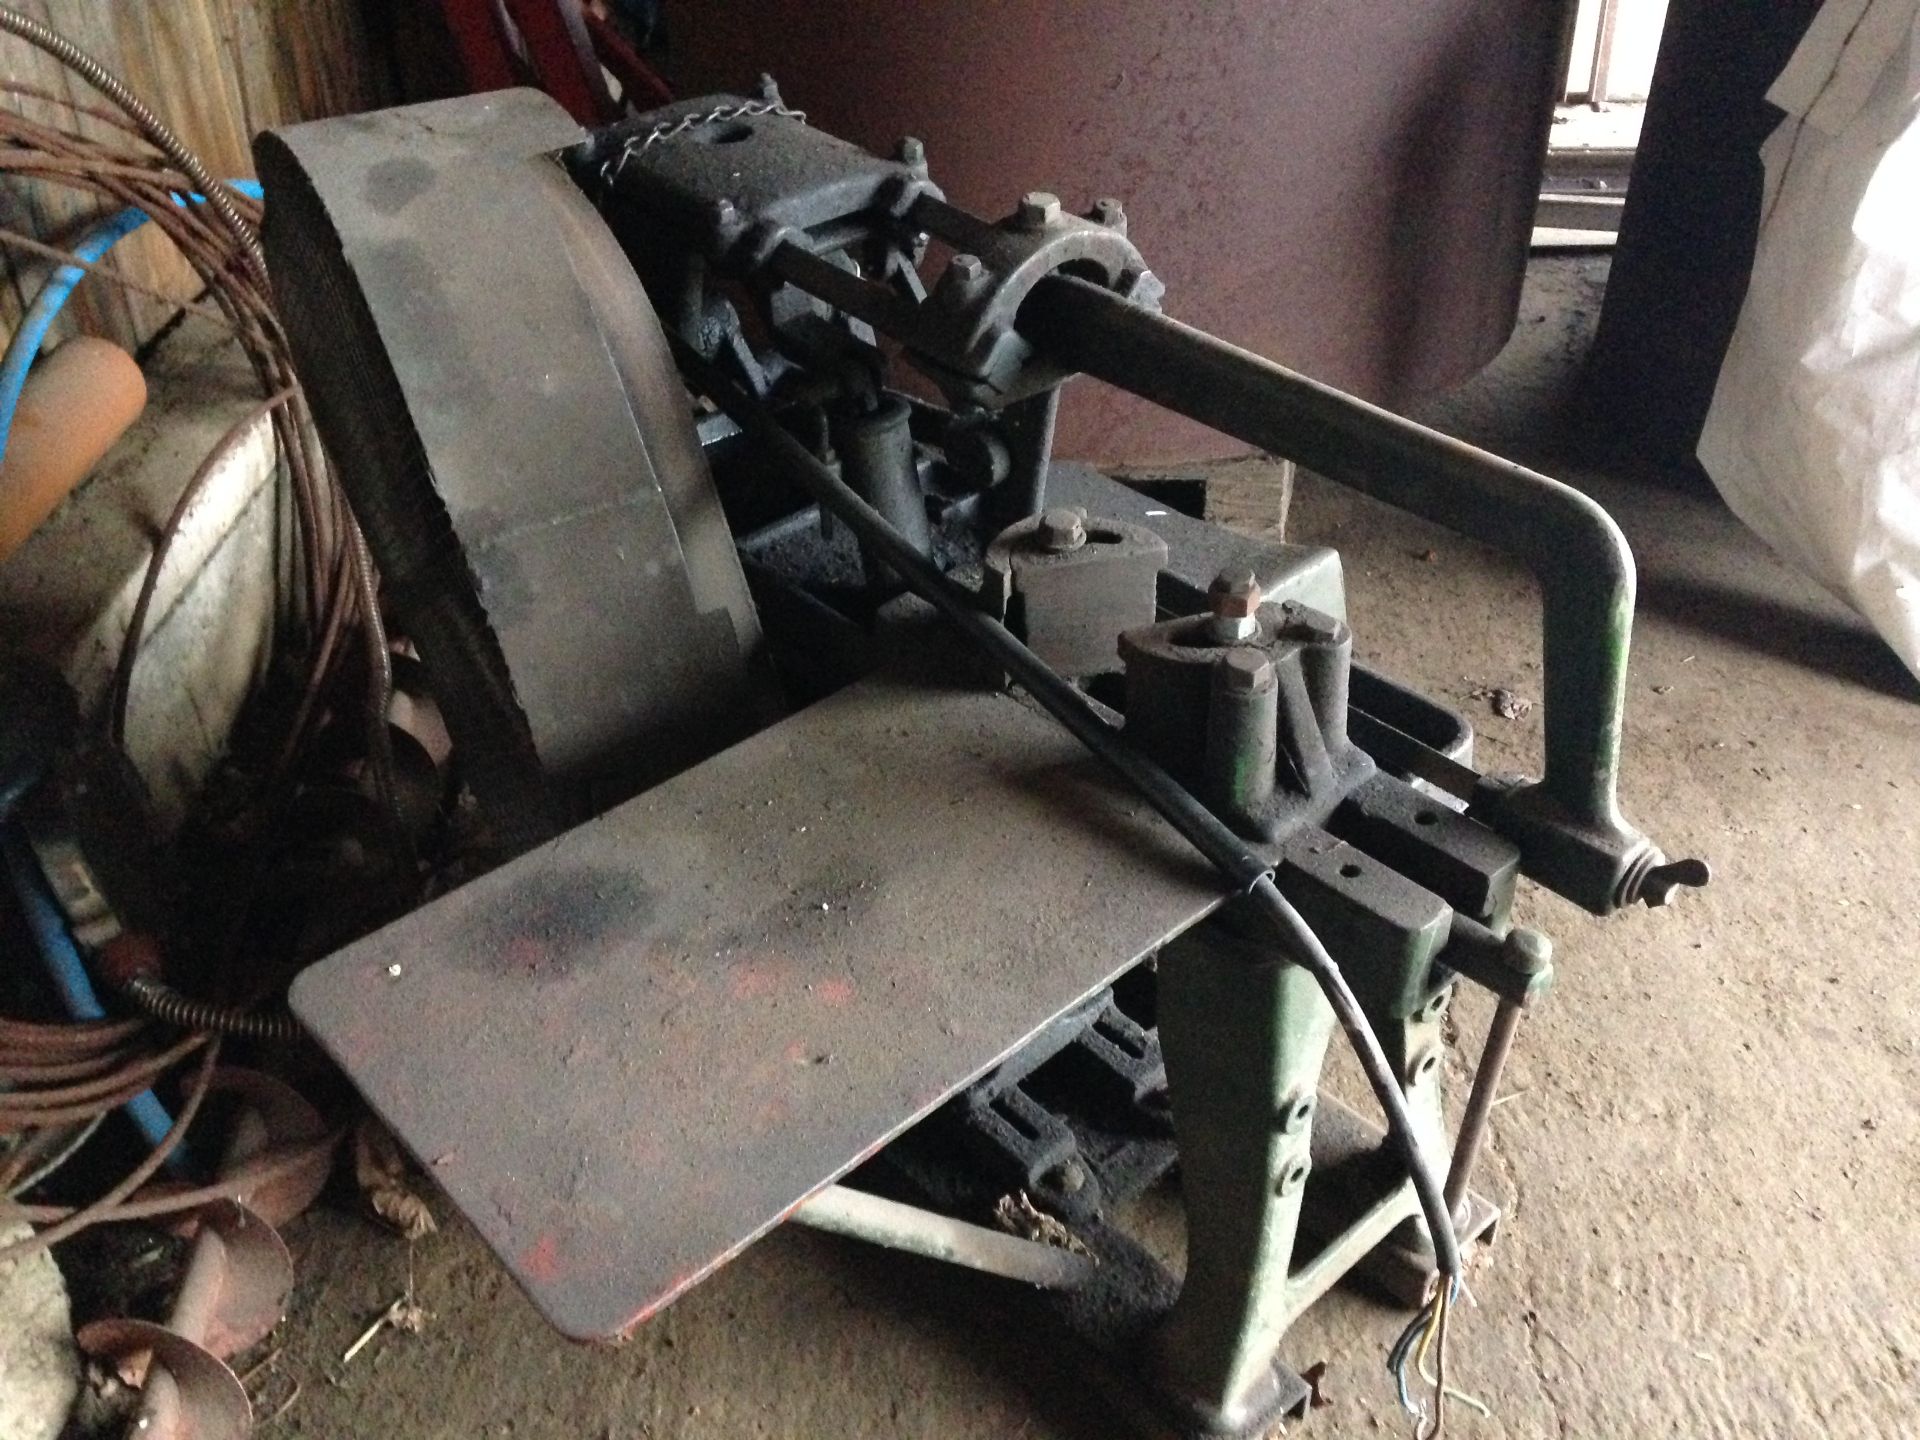 1970 Manchester Vintage Power Band Saw. - Image 2 of 2